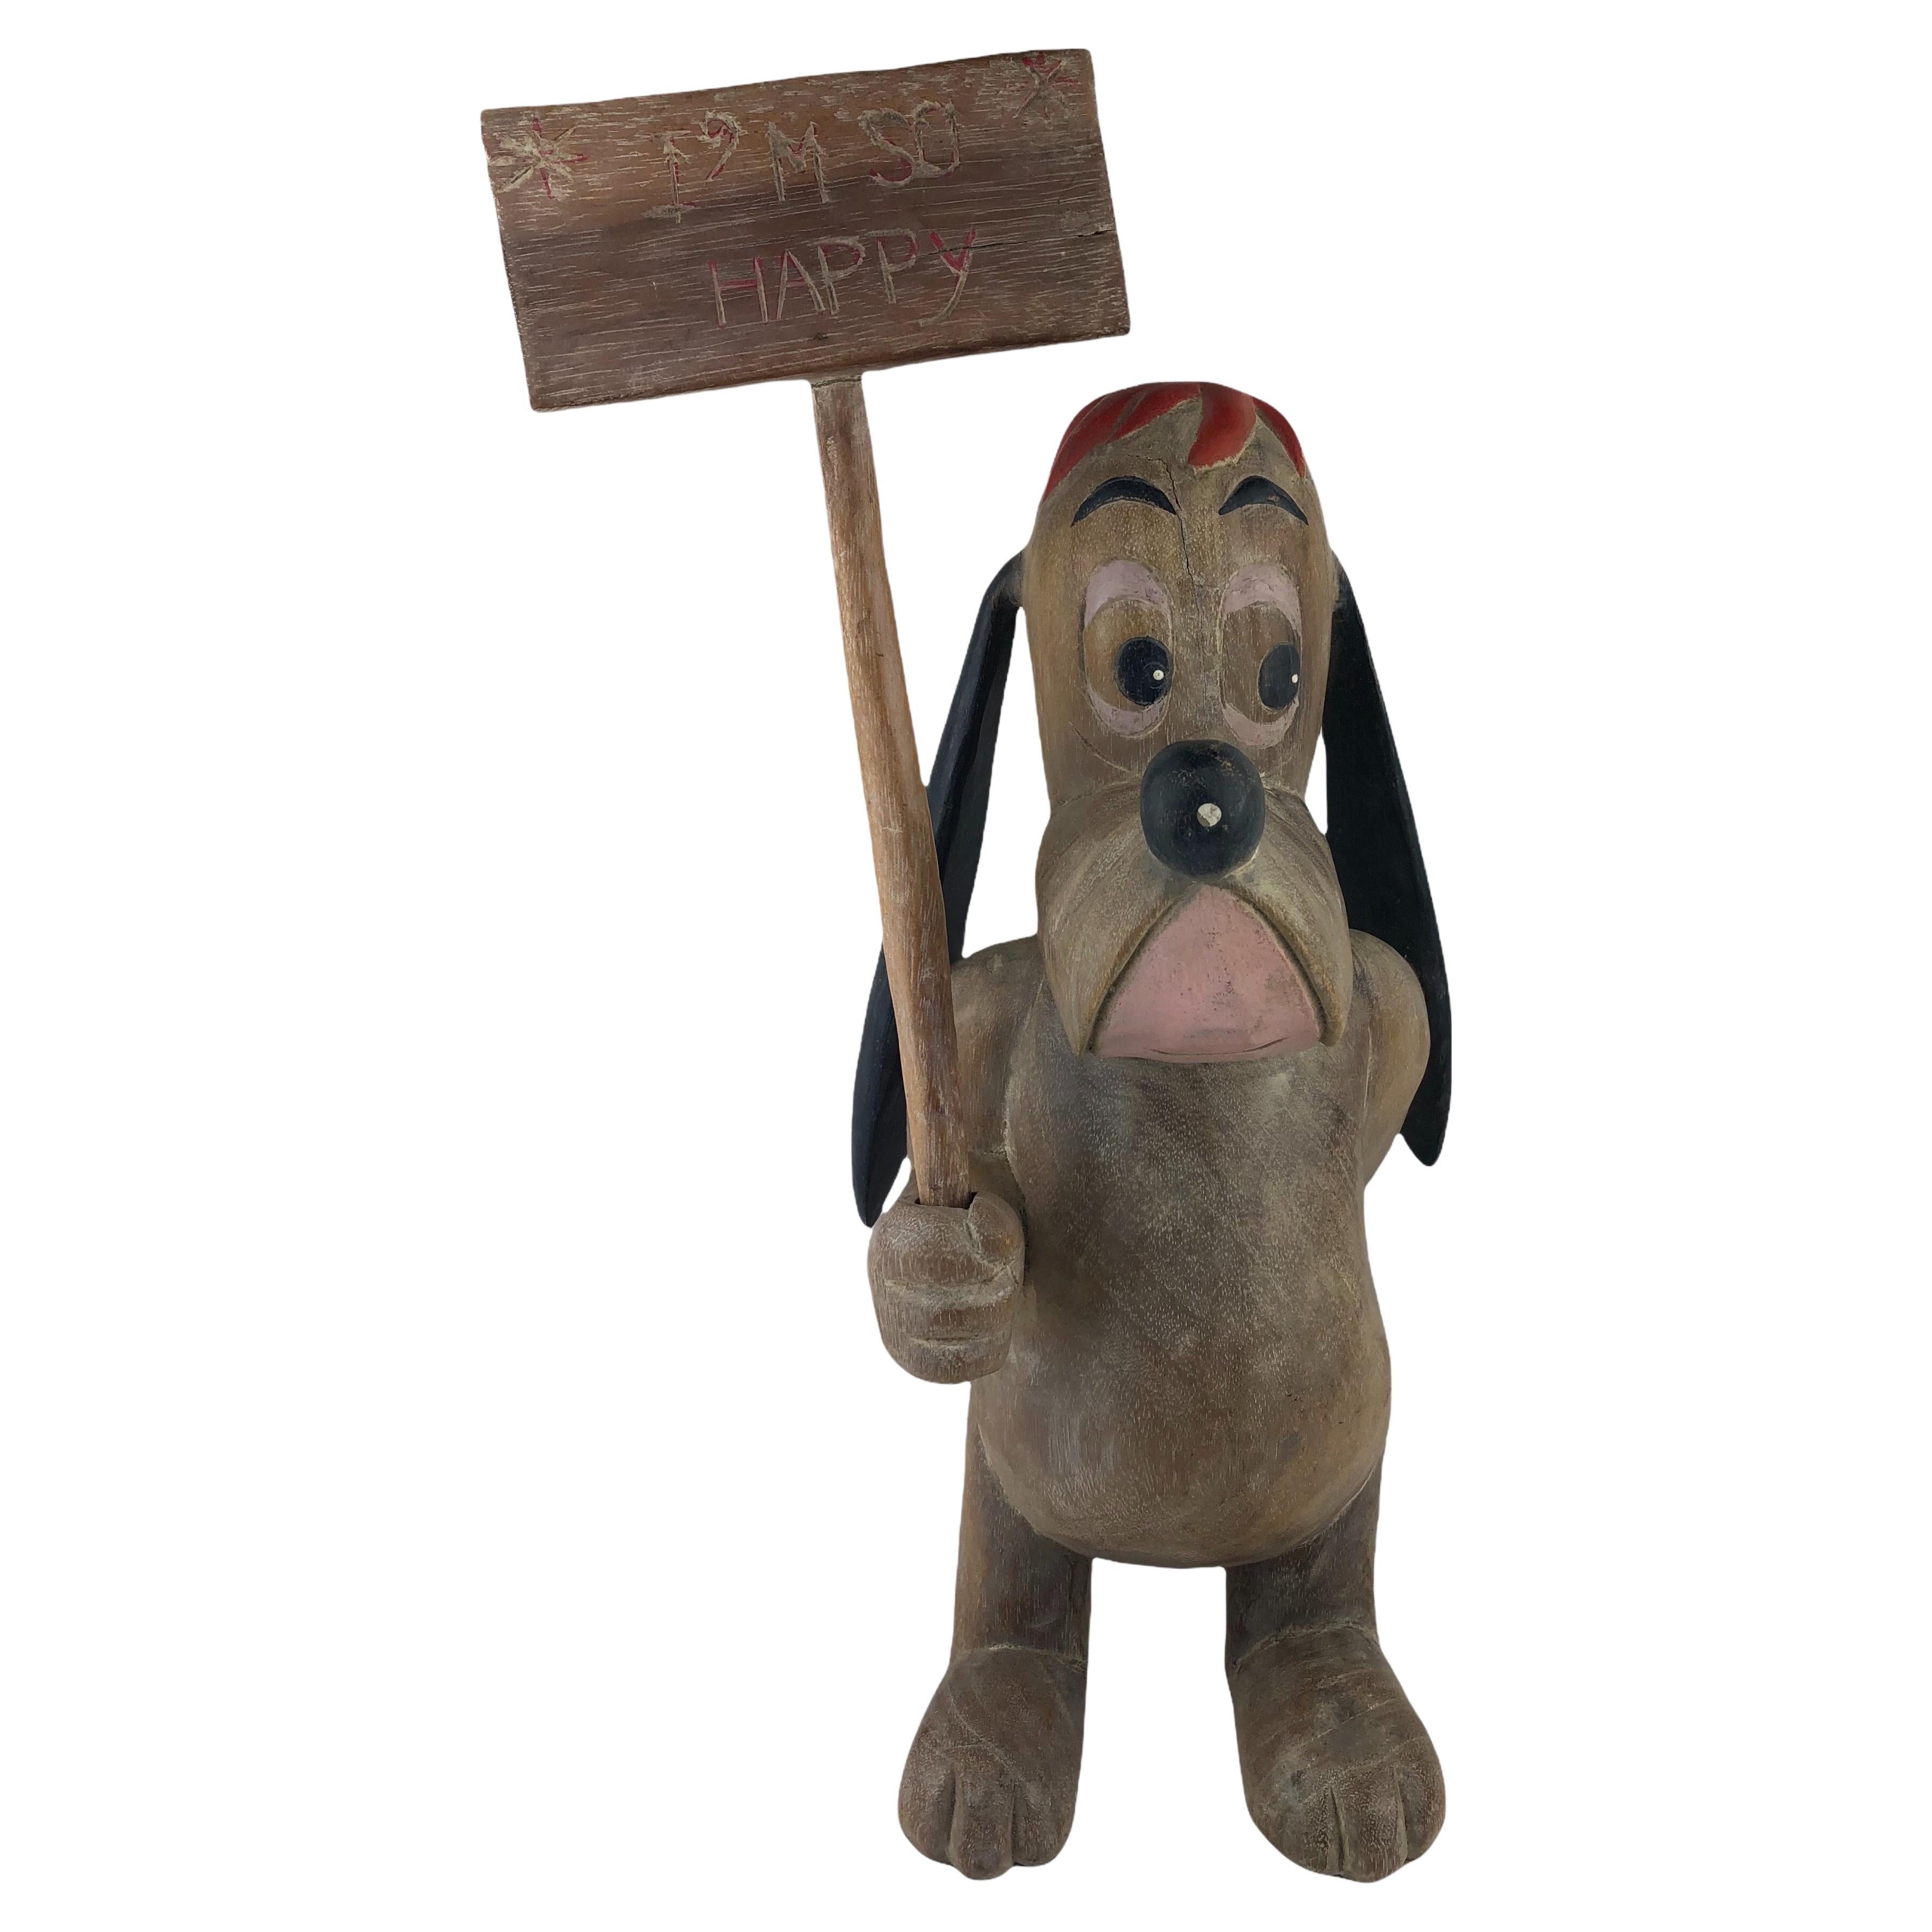 1950s Wooden Disney Droopy Sculpture